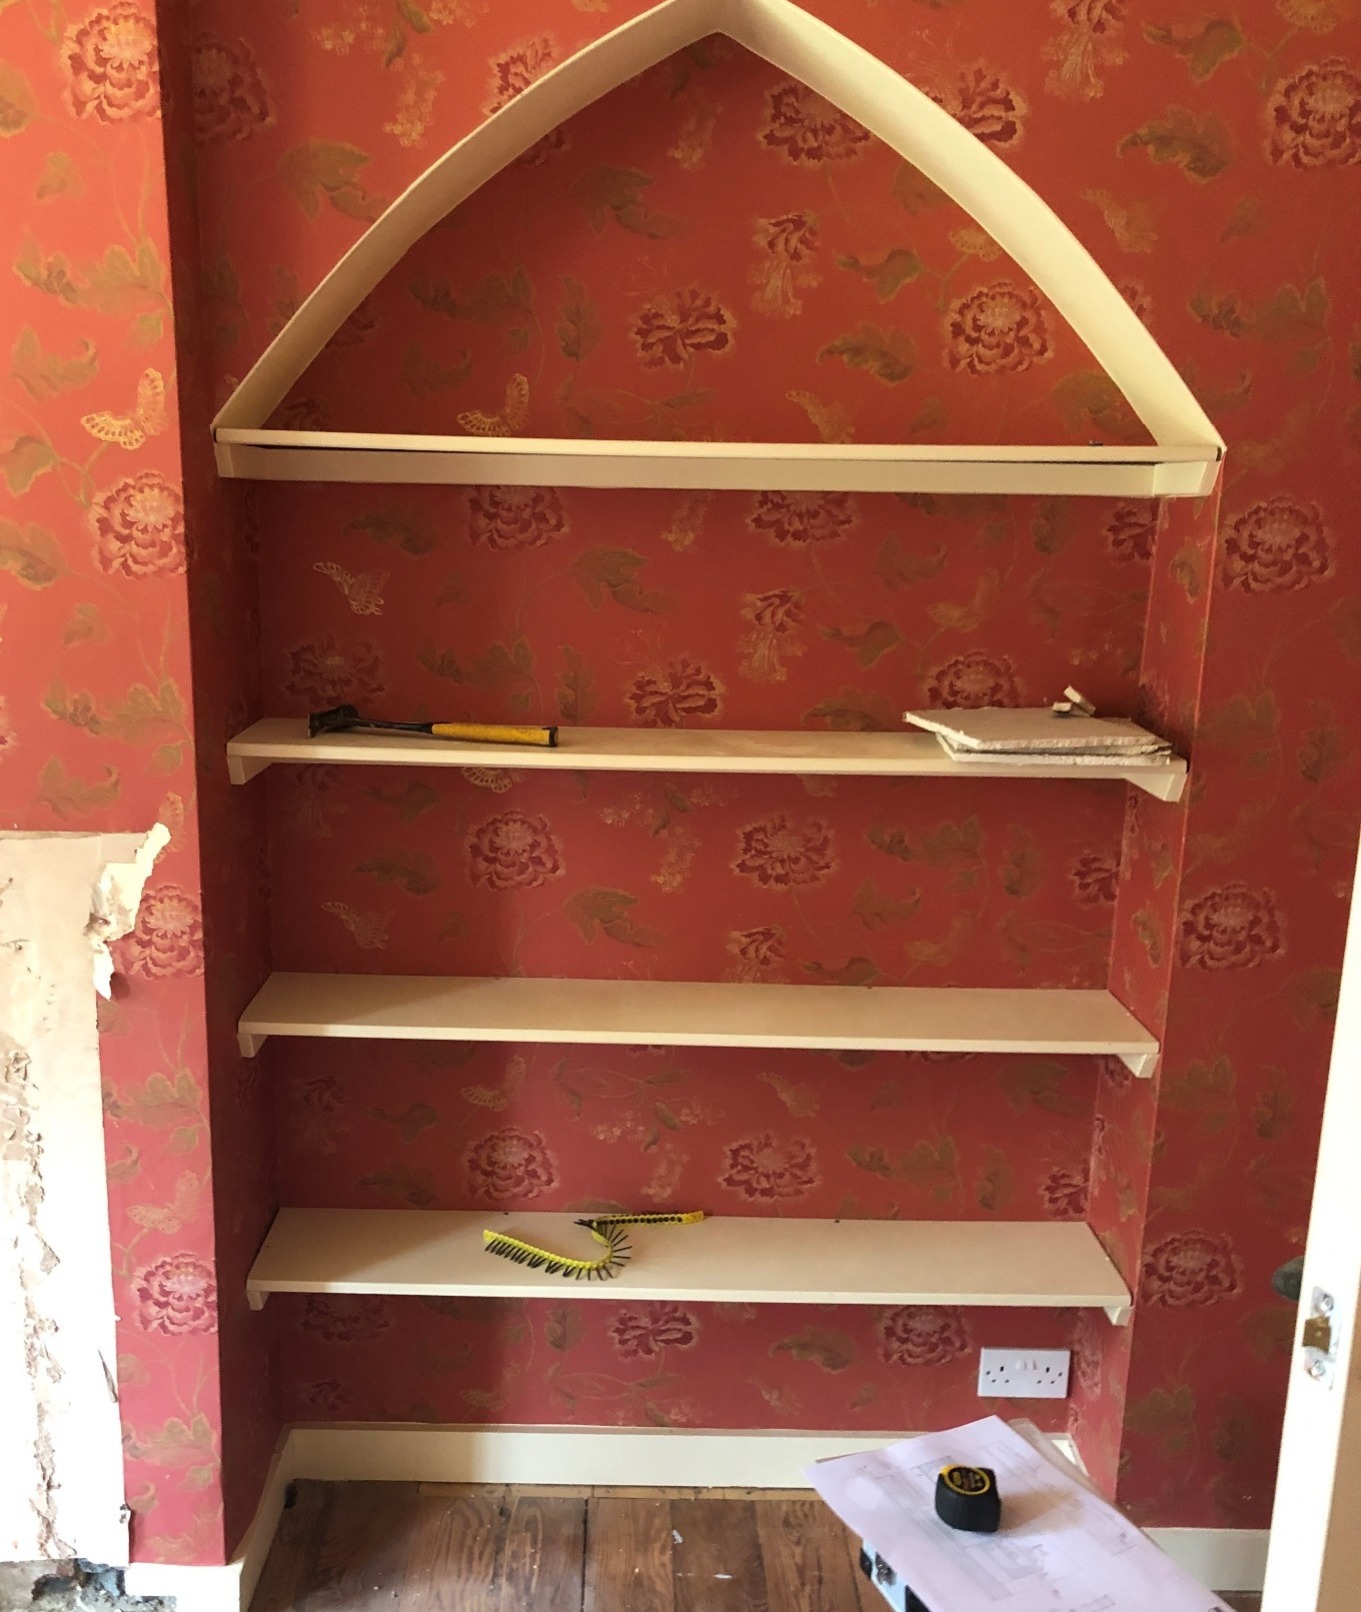 Alcove furniture during installation in Oxford